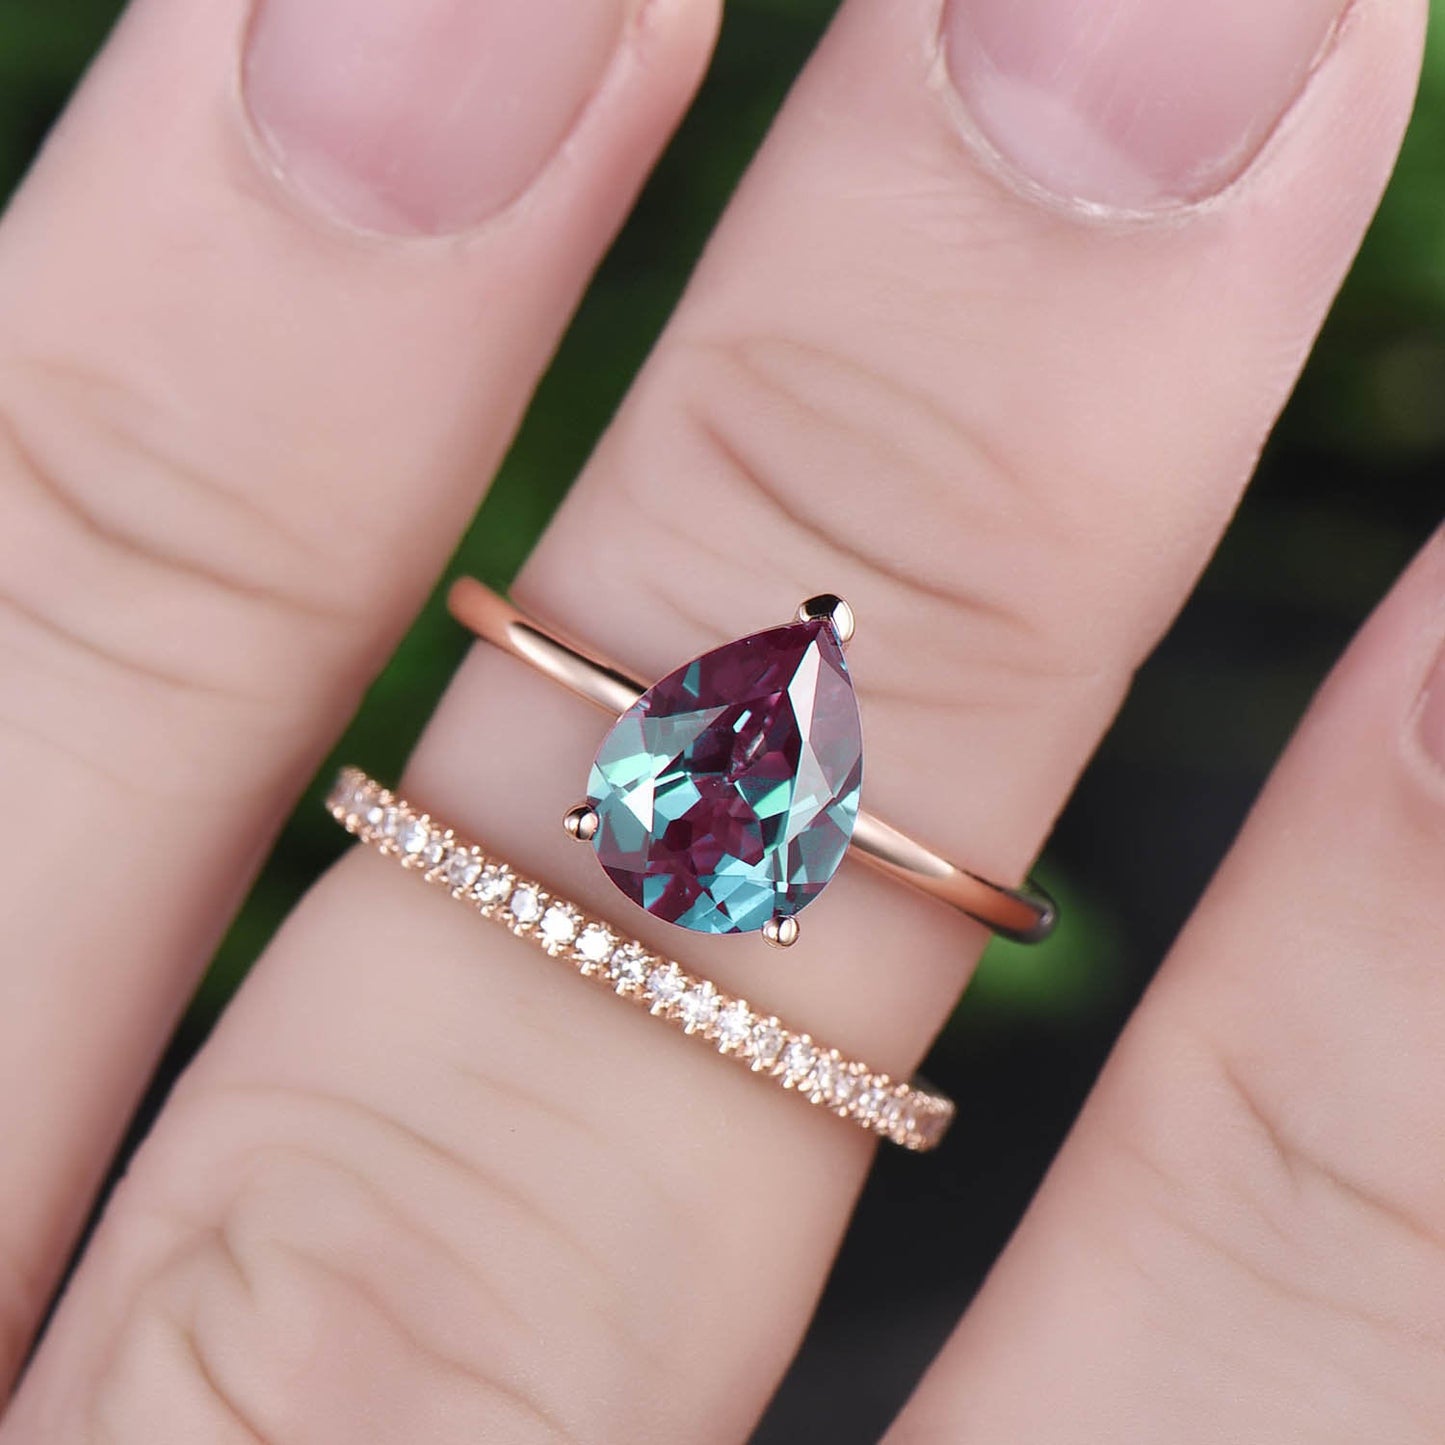 Solid rose gold ring 2ct solitaire alexandrite ring 2pcs color change alexandrite engagement ring set full eternity diamond wedding band